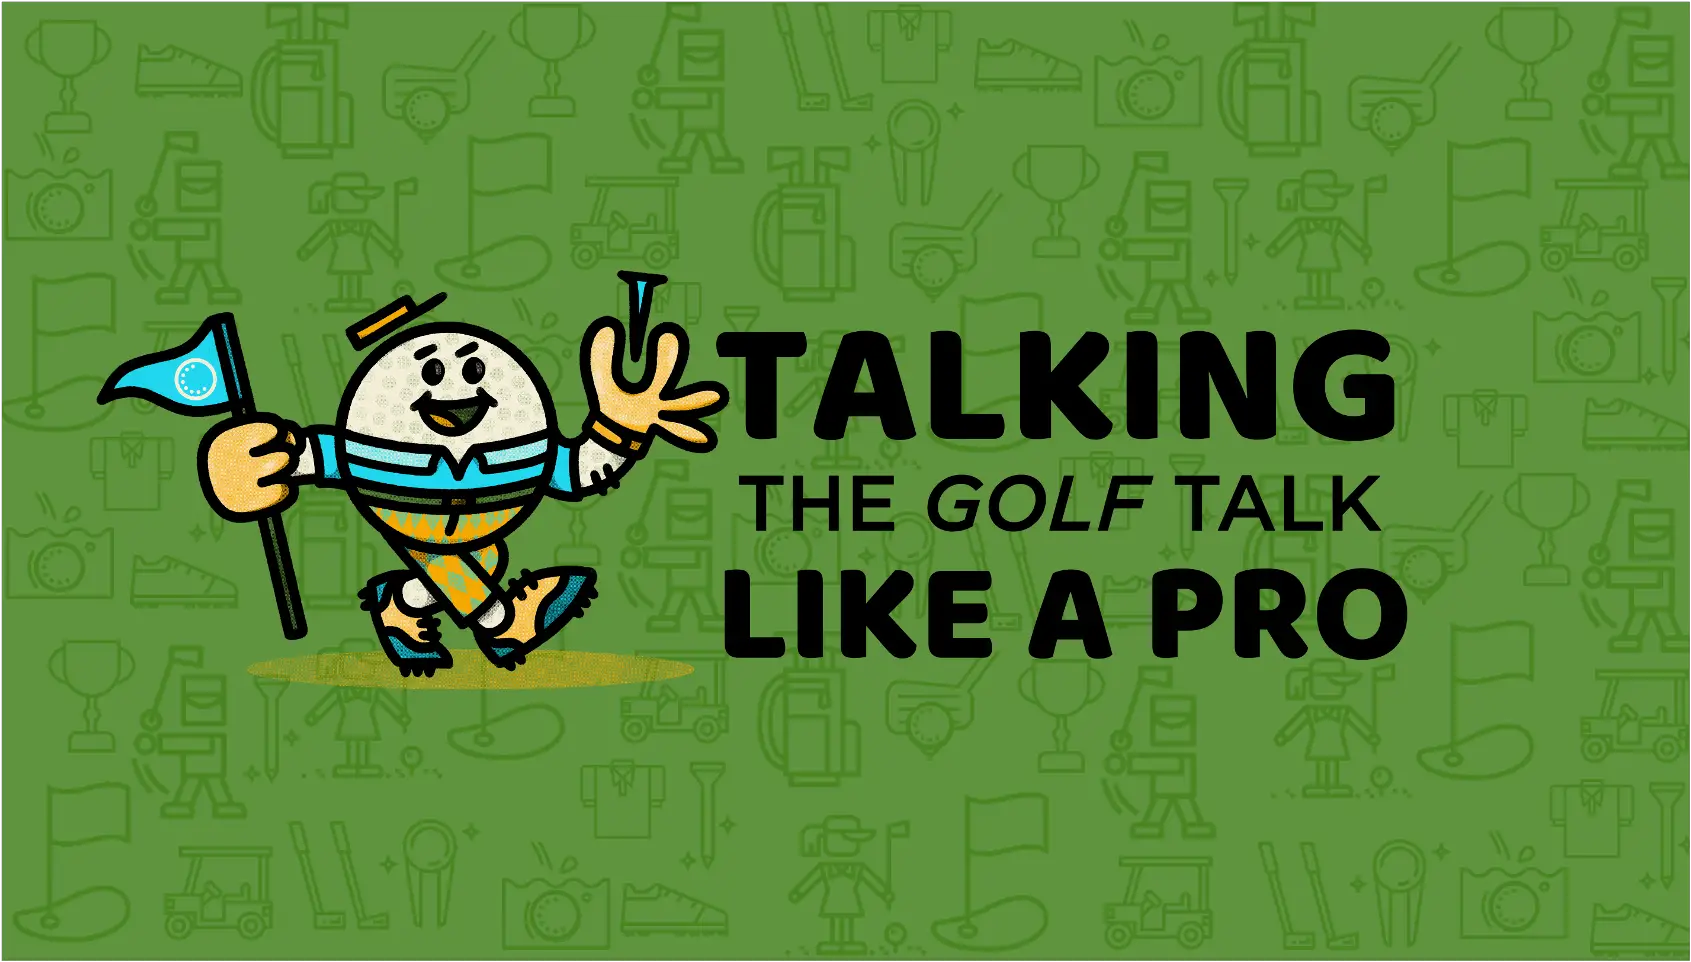 Golfing terms and phrases to learn to be talking on the golf course like a pro - Chasing Par Golf with Chase the Golfer